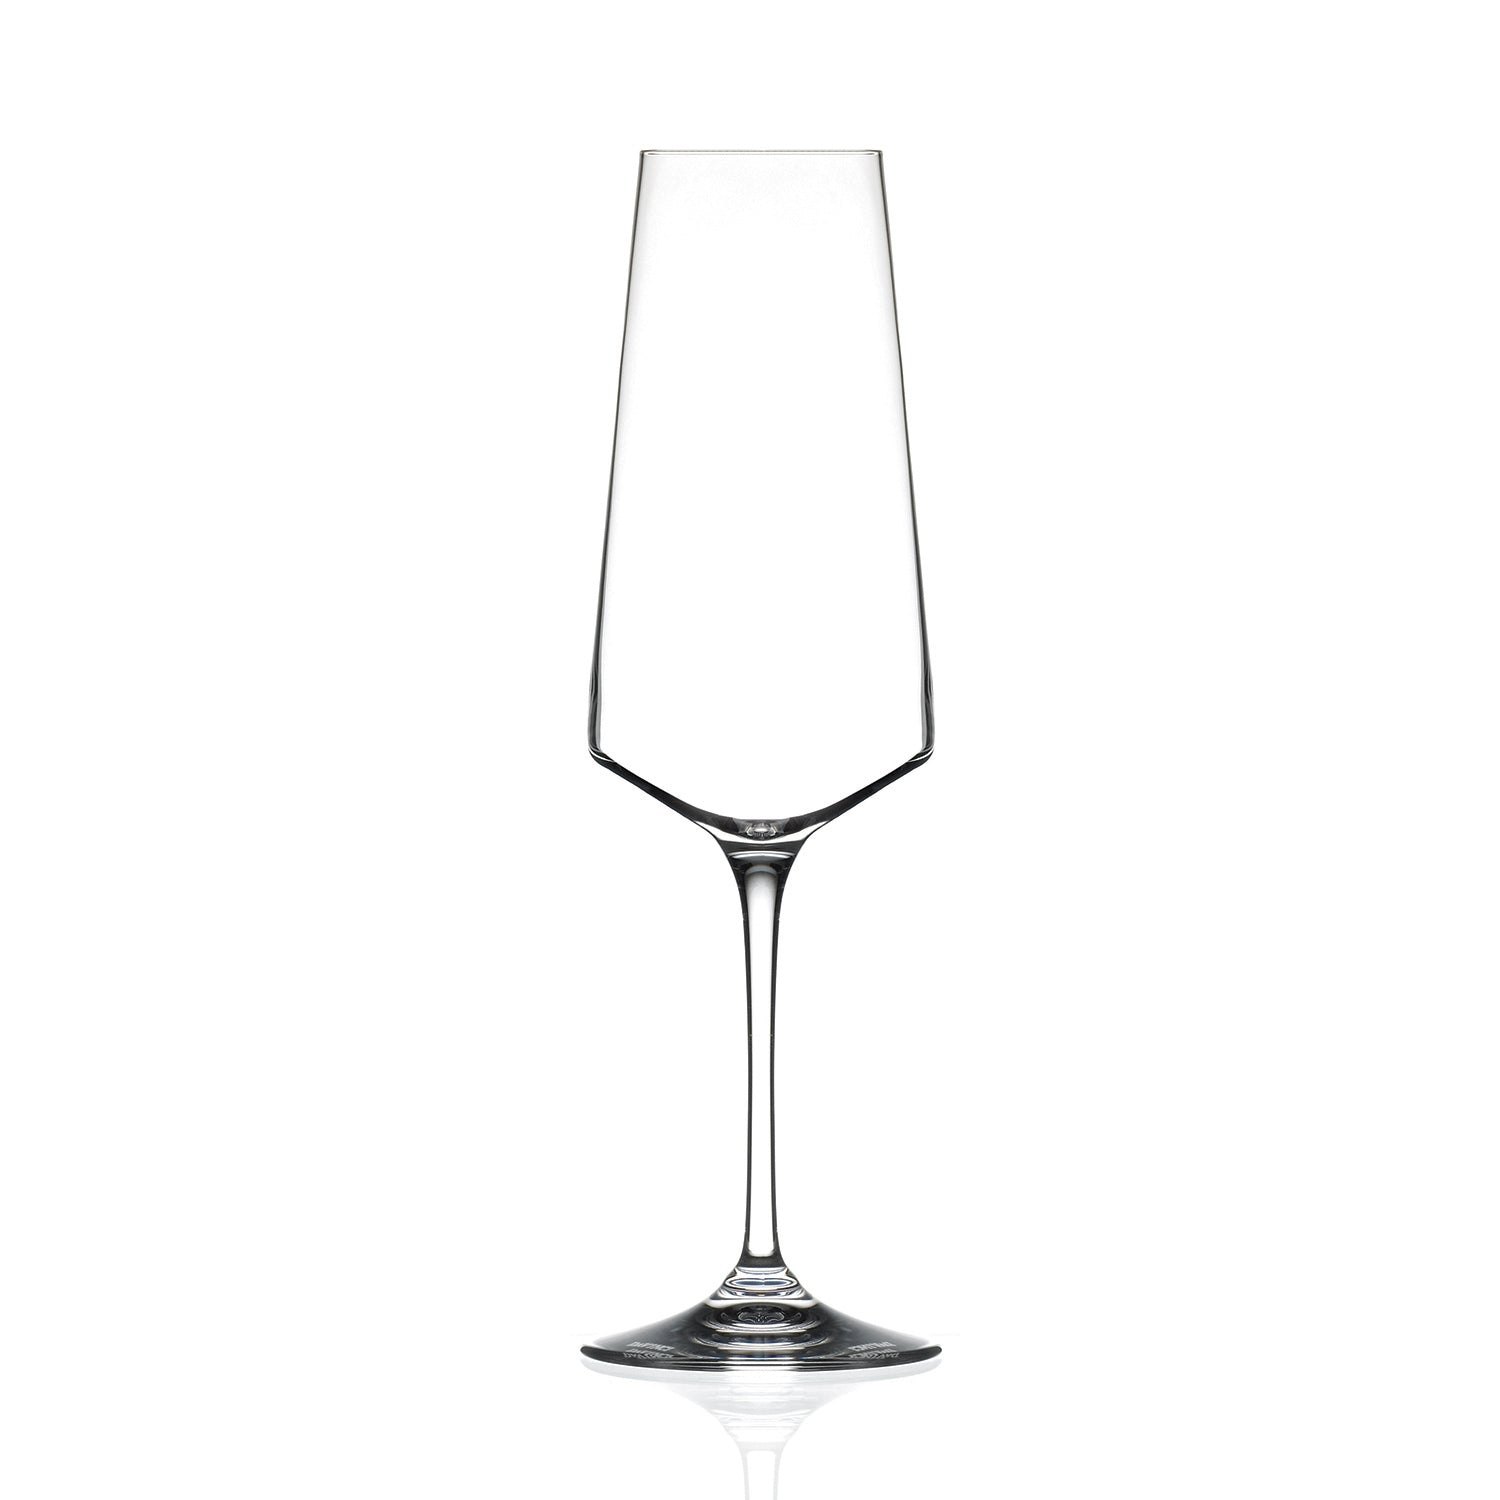 RCR (Made in Italy) Aria Crystal Champagne Flute Goblet Glasses, 350 ml, Set of 6